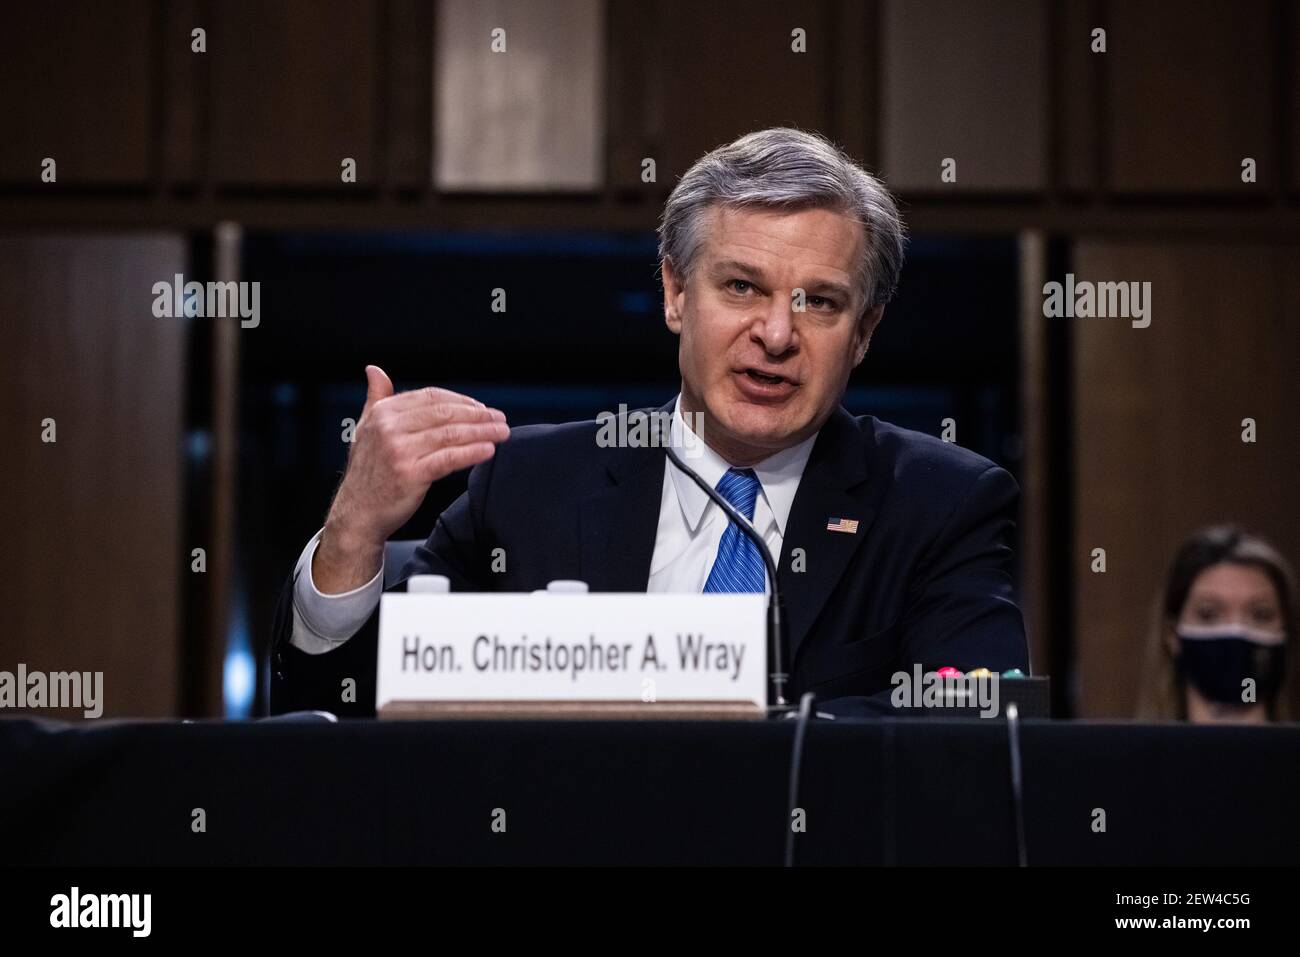 Federal Bureau of Investigation Director Christopher Wray testifies on Capitol Hill, in Washington, before a Senate Judiciary Committee on the the January 6th Insurrection, domestic terrorism and other threats, Tuesday, March 2, 2021.Credit: Graeme Jennings/Pool via CNP /MediaPunch Stock Photo